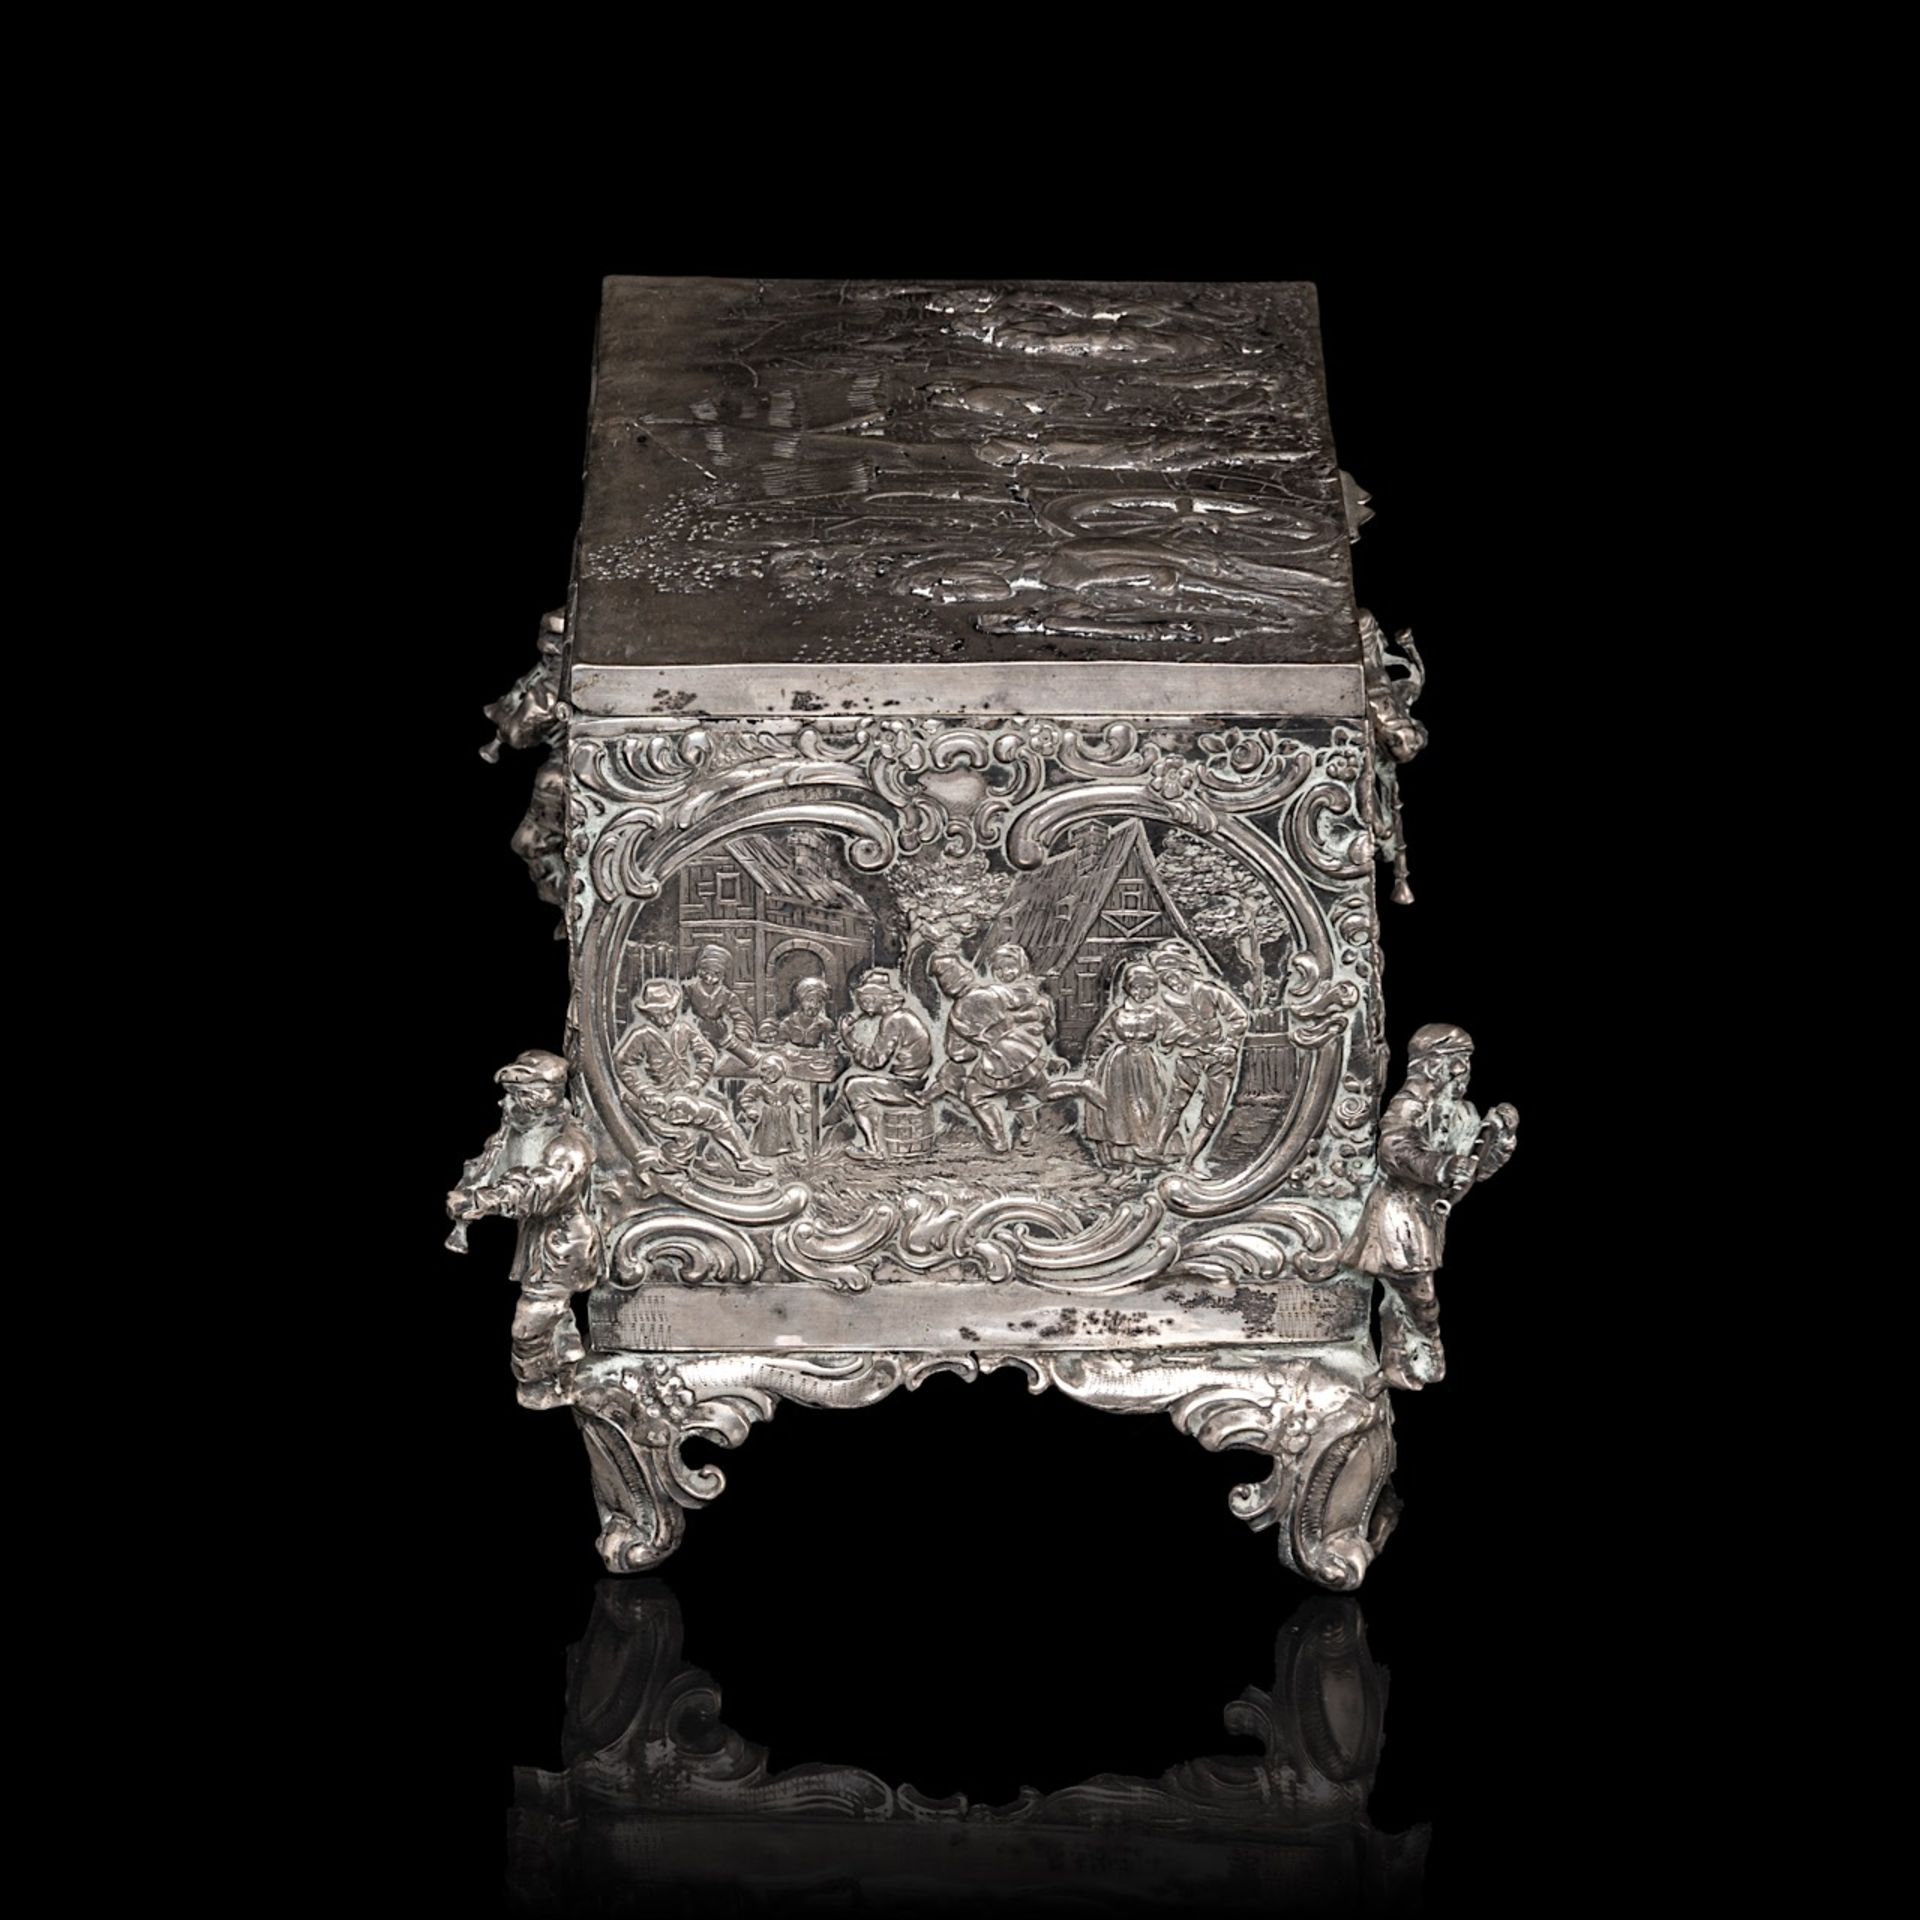 A Baroque Revival German silver jewellery casket, (1888-present), 800/000, weight ca: 1312 g 14.5 x - Image 5 of 9